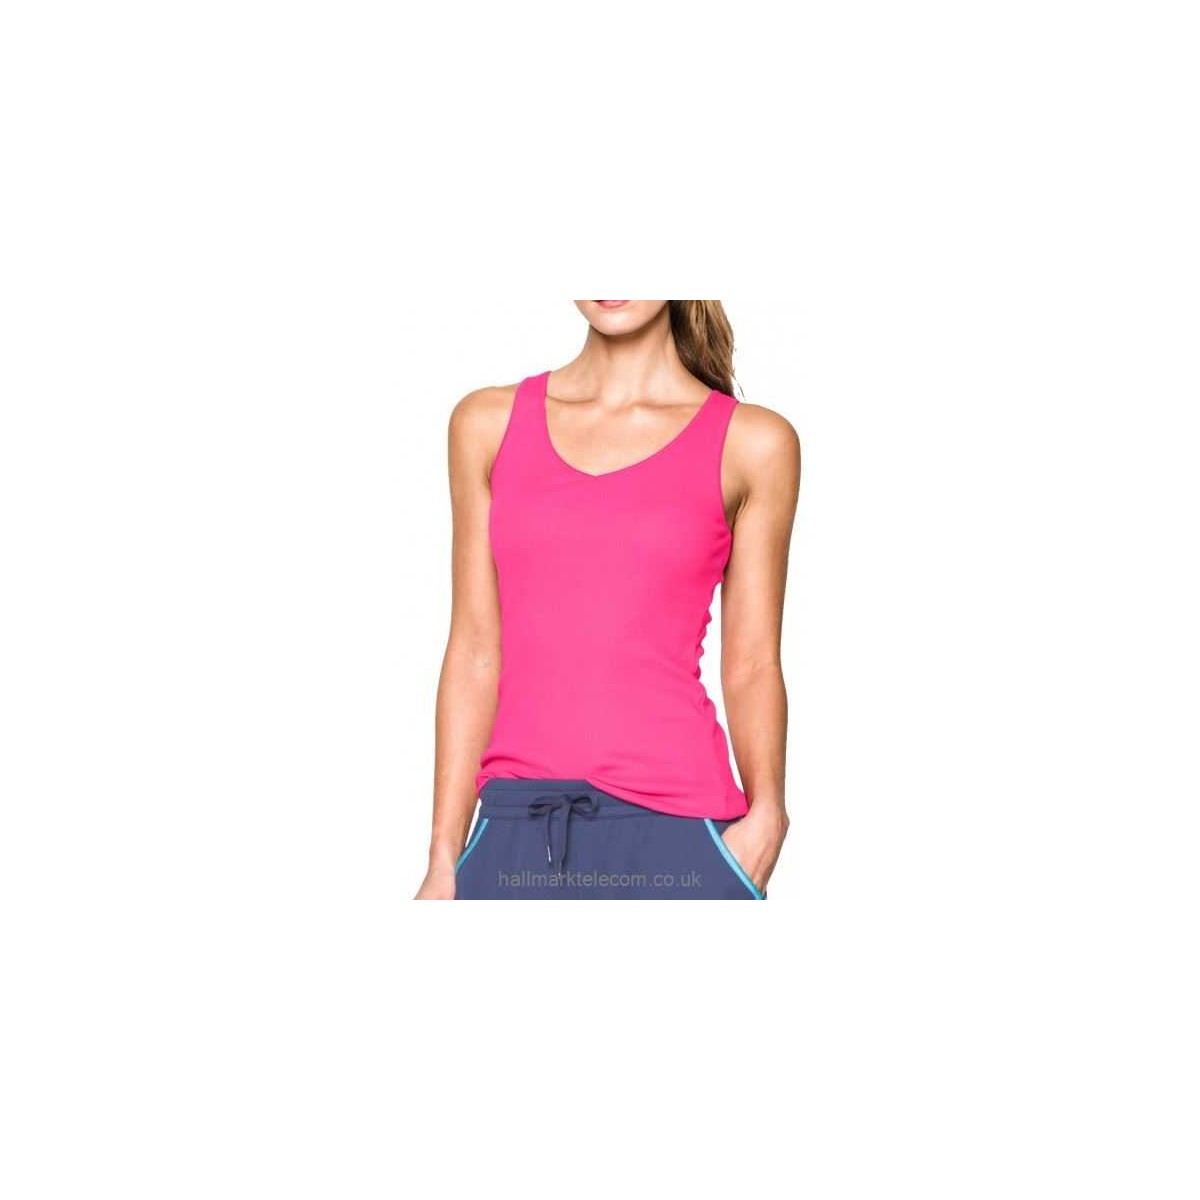 CANOTTA UNDER ARMOUR W STOCK RUNNING FUCSIA DONNA UNDER ARMOUR SPORTS WEAR